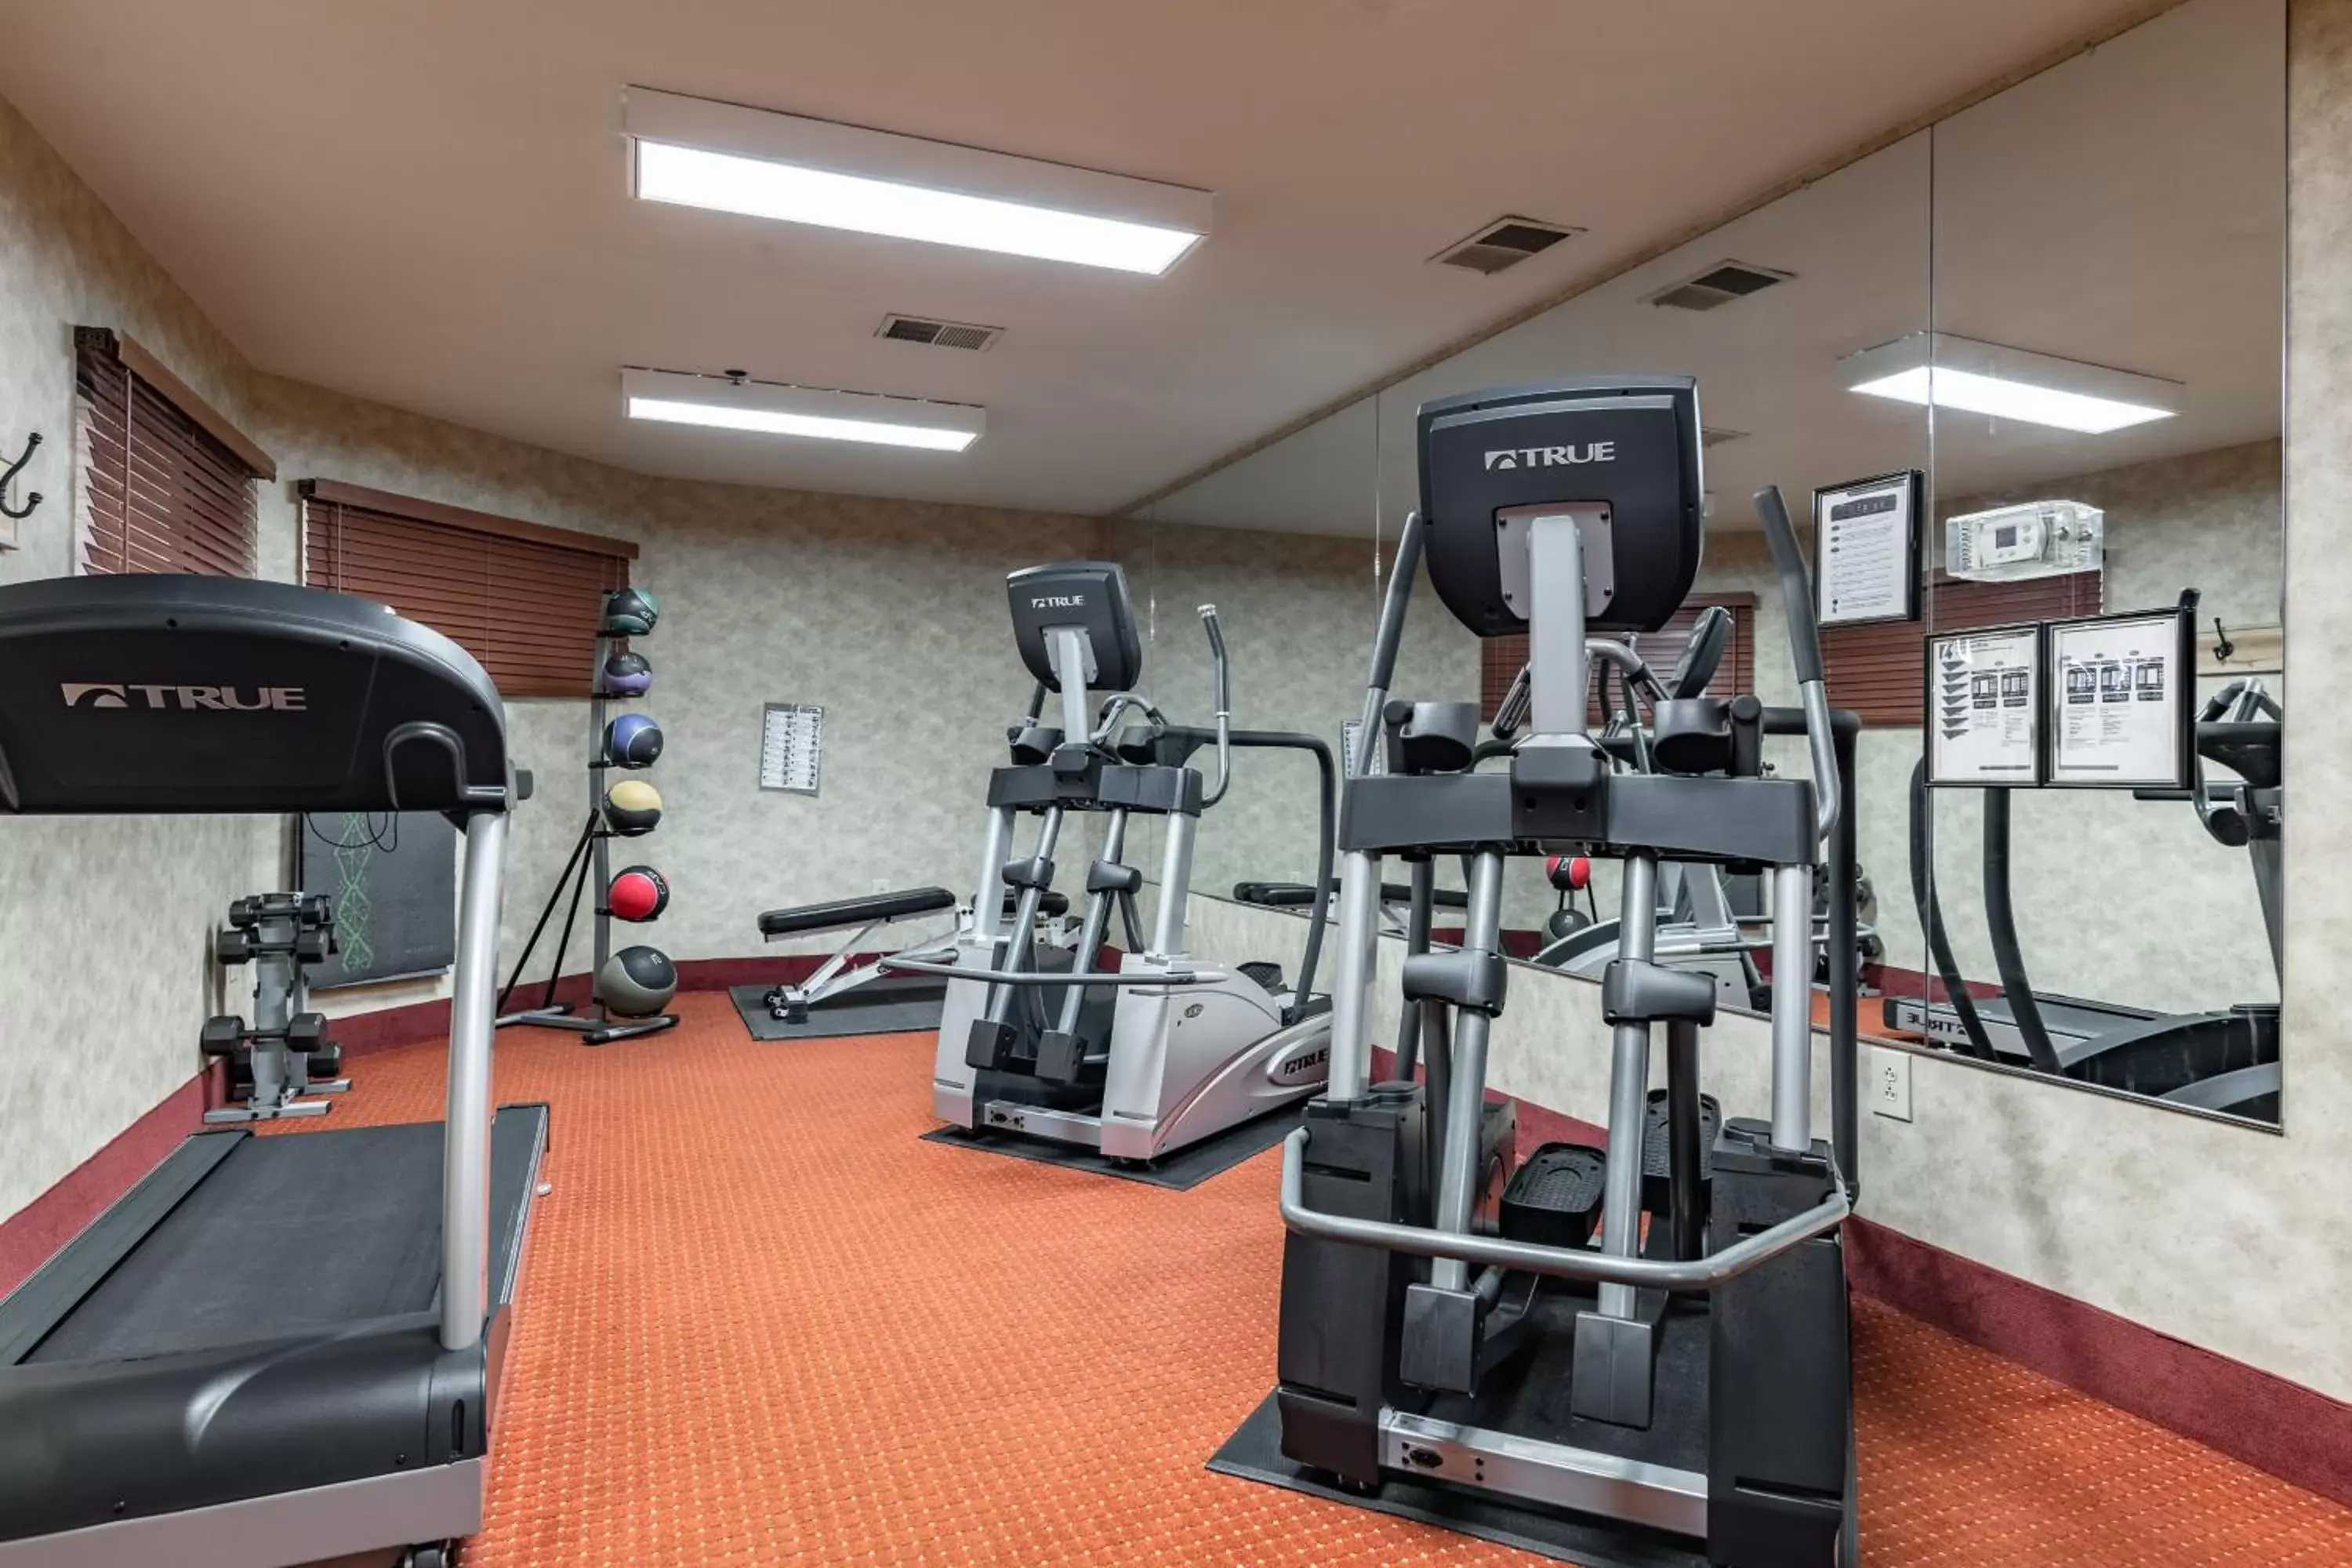 Fitness centre/facilities, Fitness Center/Facilities in Wingate by Wyndham Parkersburg - Vienna